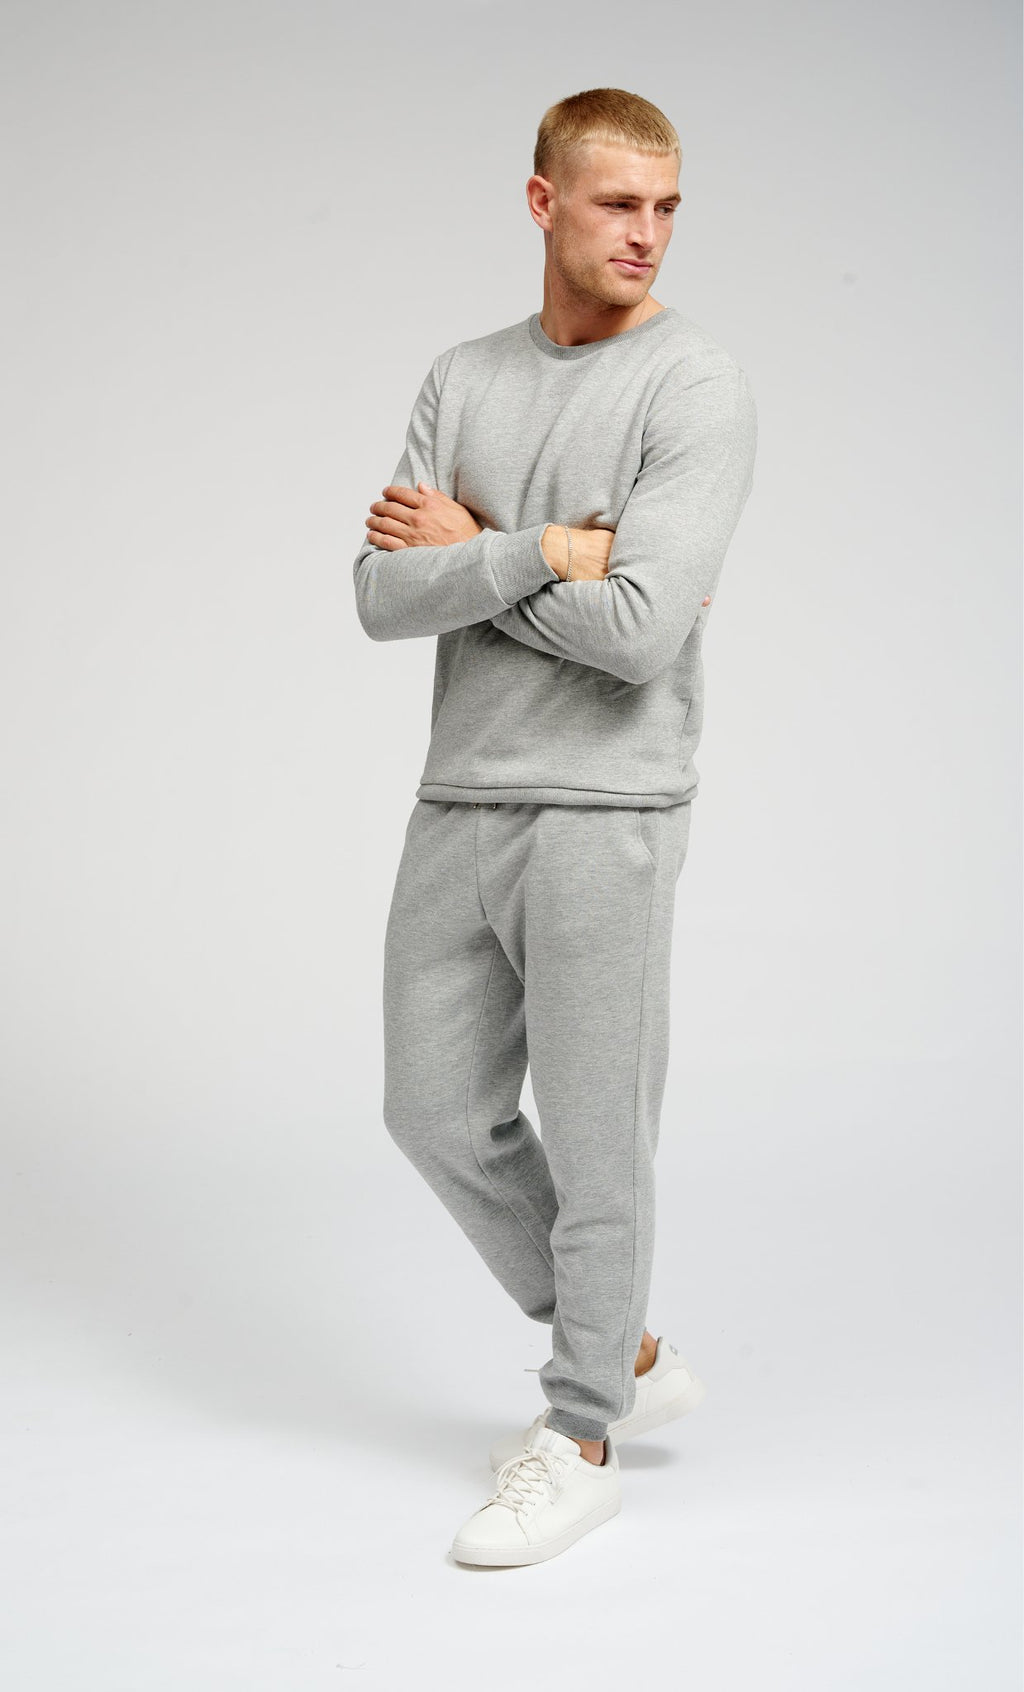 Basic Sweatsuit with Crewneck (Light Grey) - Package Deal